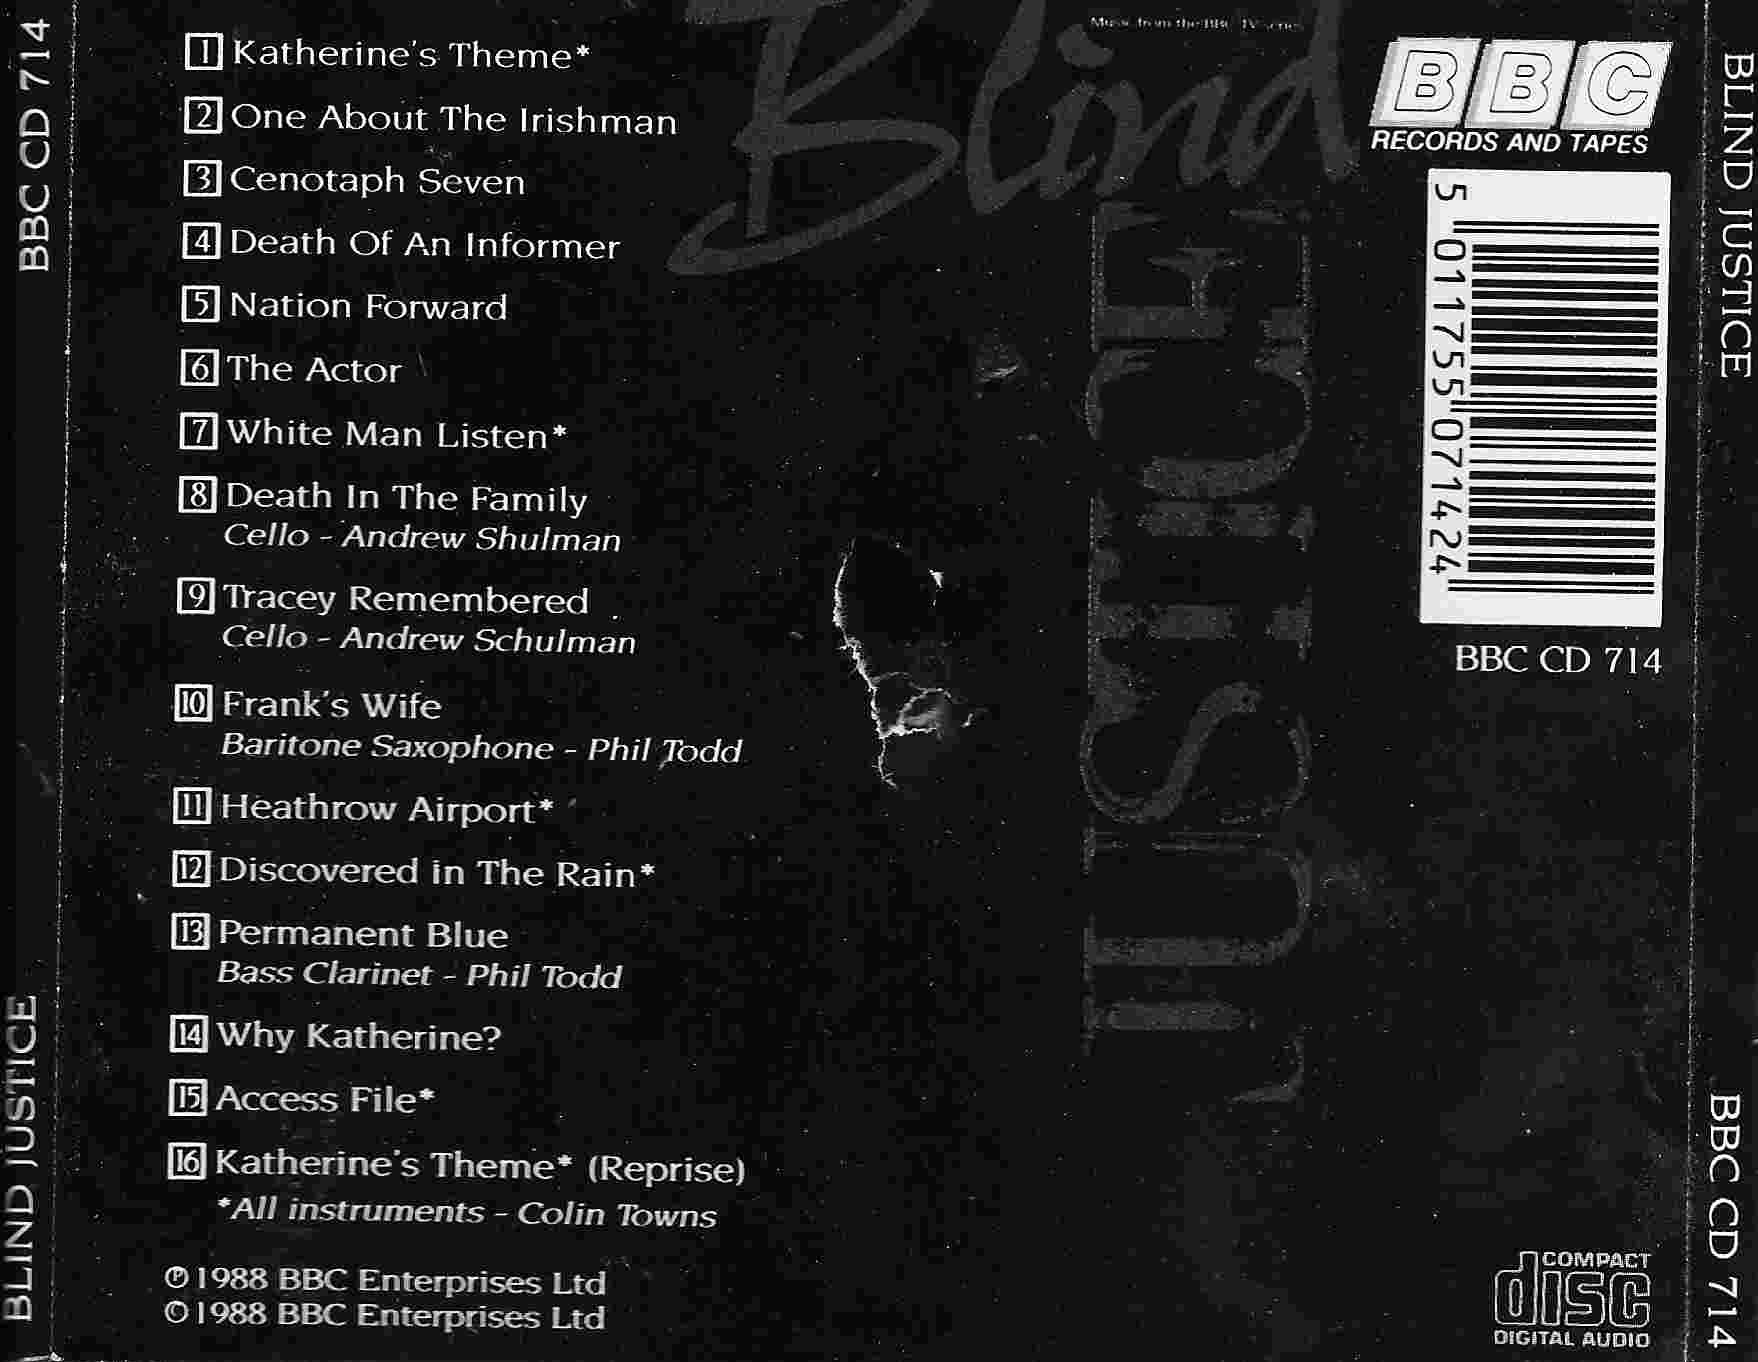 Picture of BBCCD714 Blind justice by artist Colin Towns from the BBC records and Tapes library